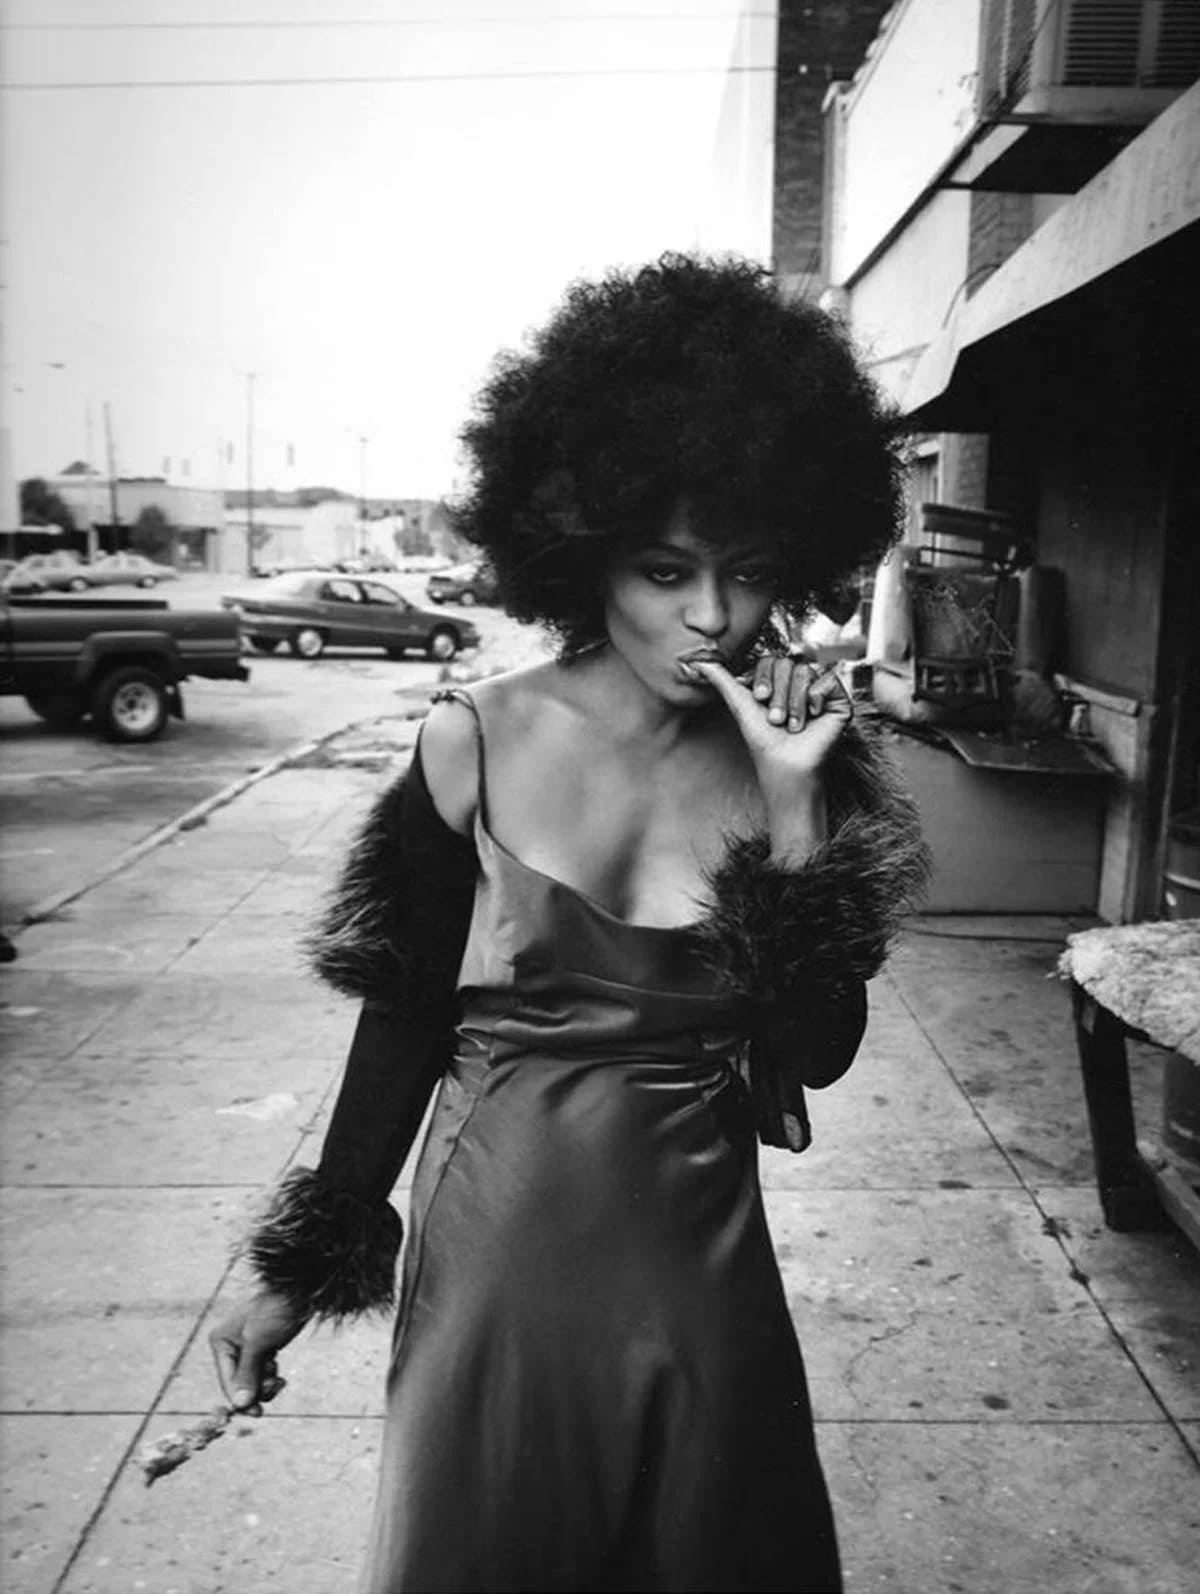 Diana Ross when she was younger.